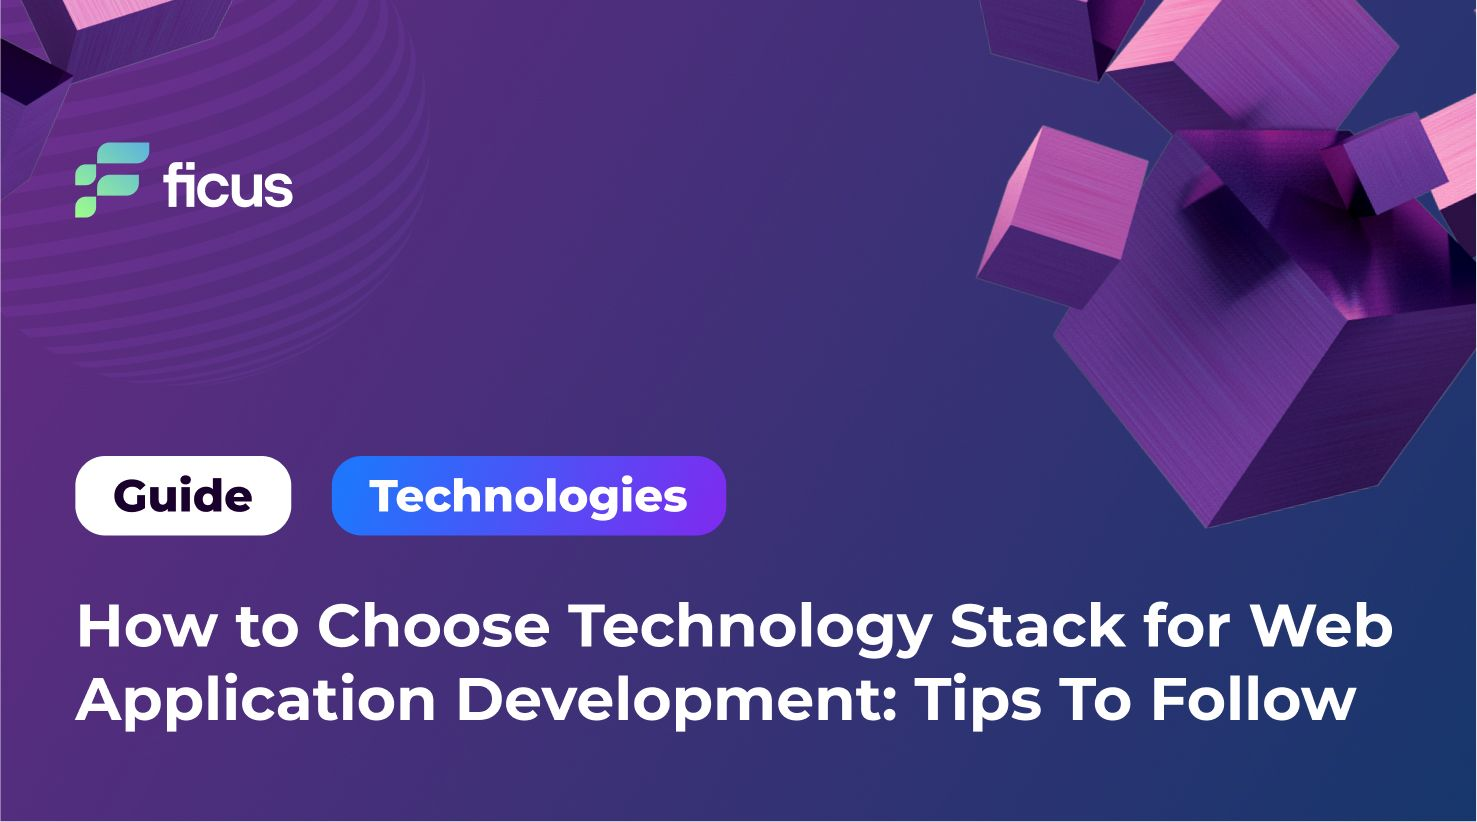 How to Choose Technology Stack for Web Application Development: Tips To Follow